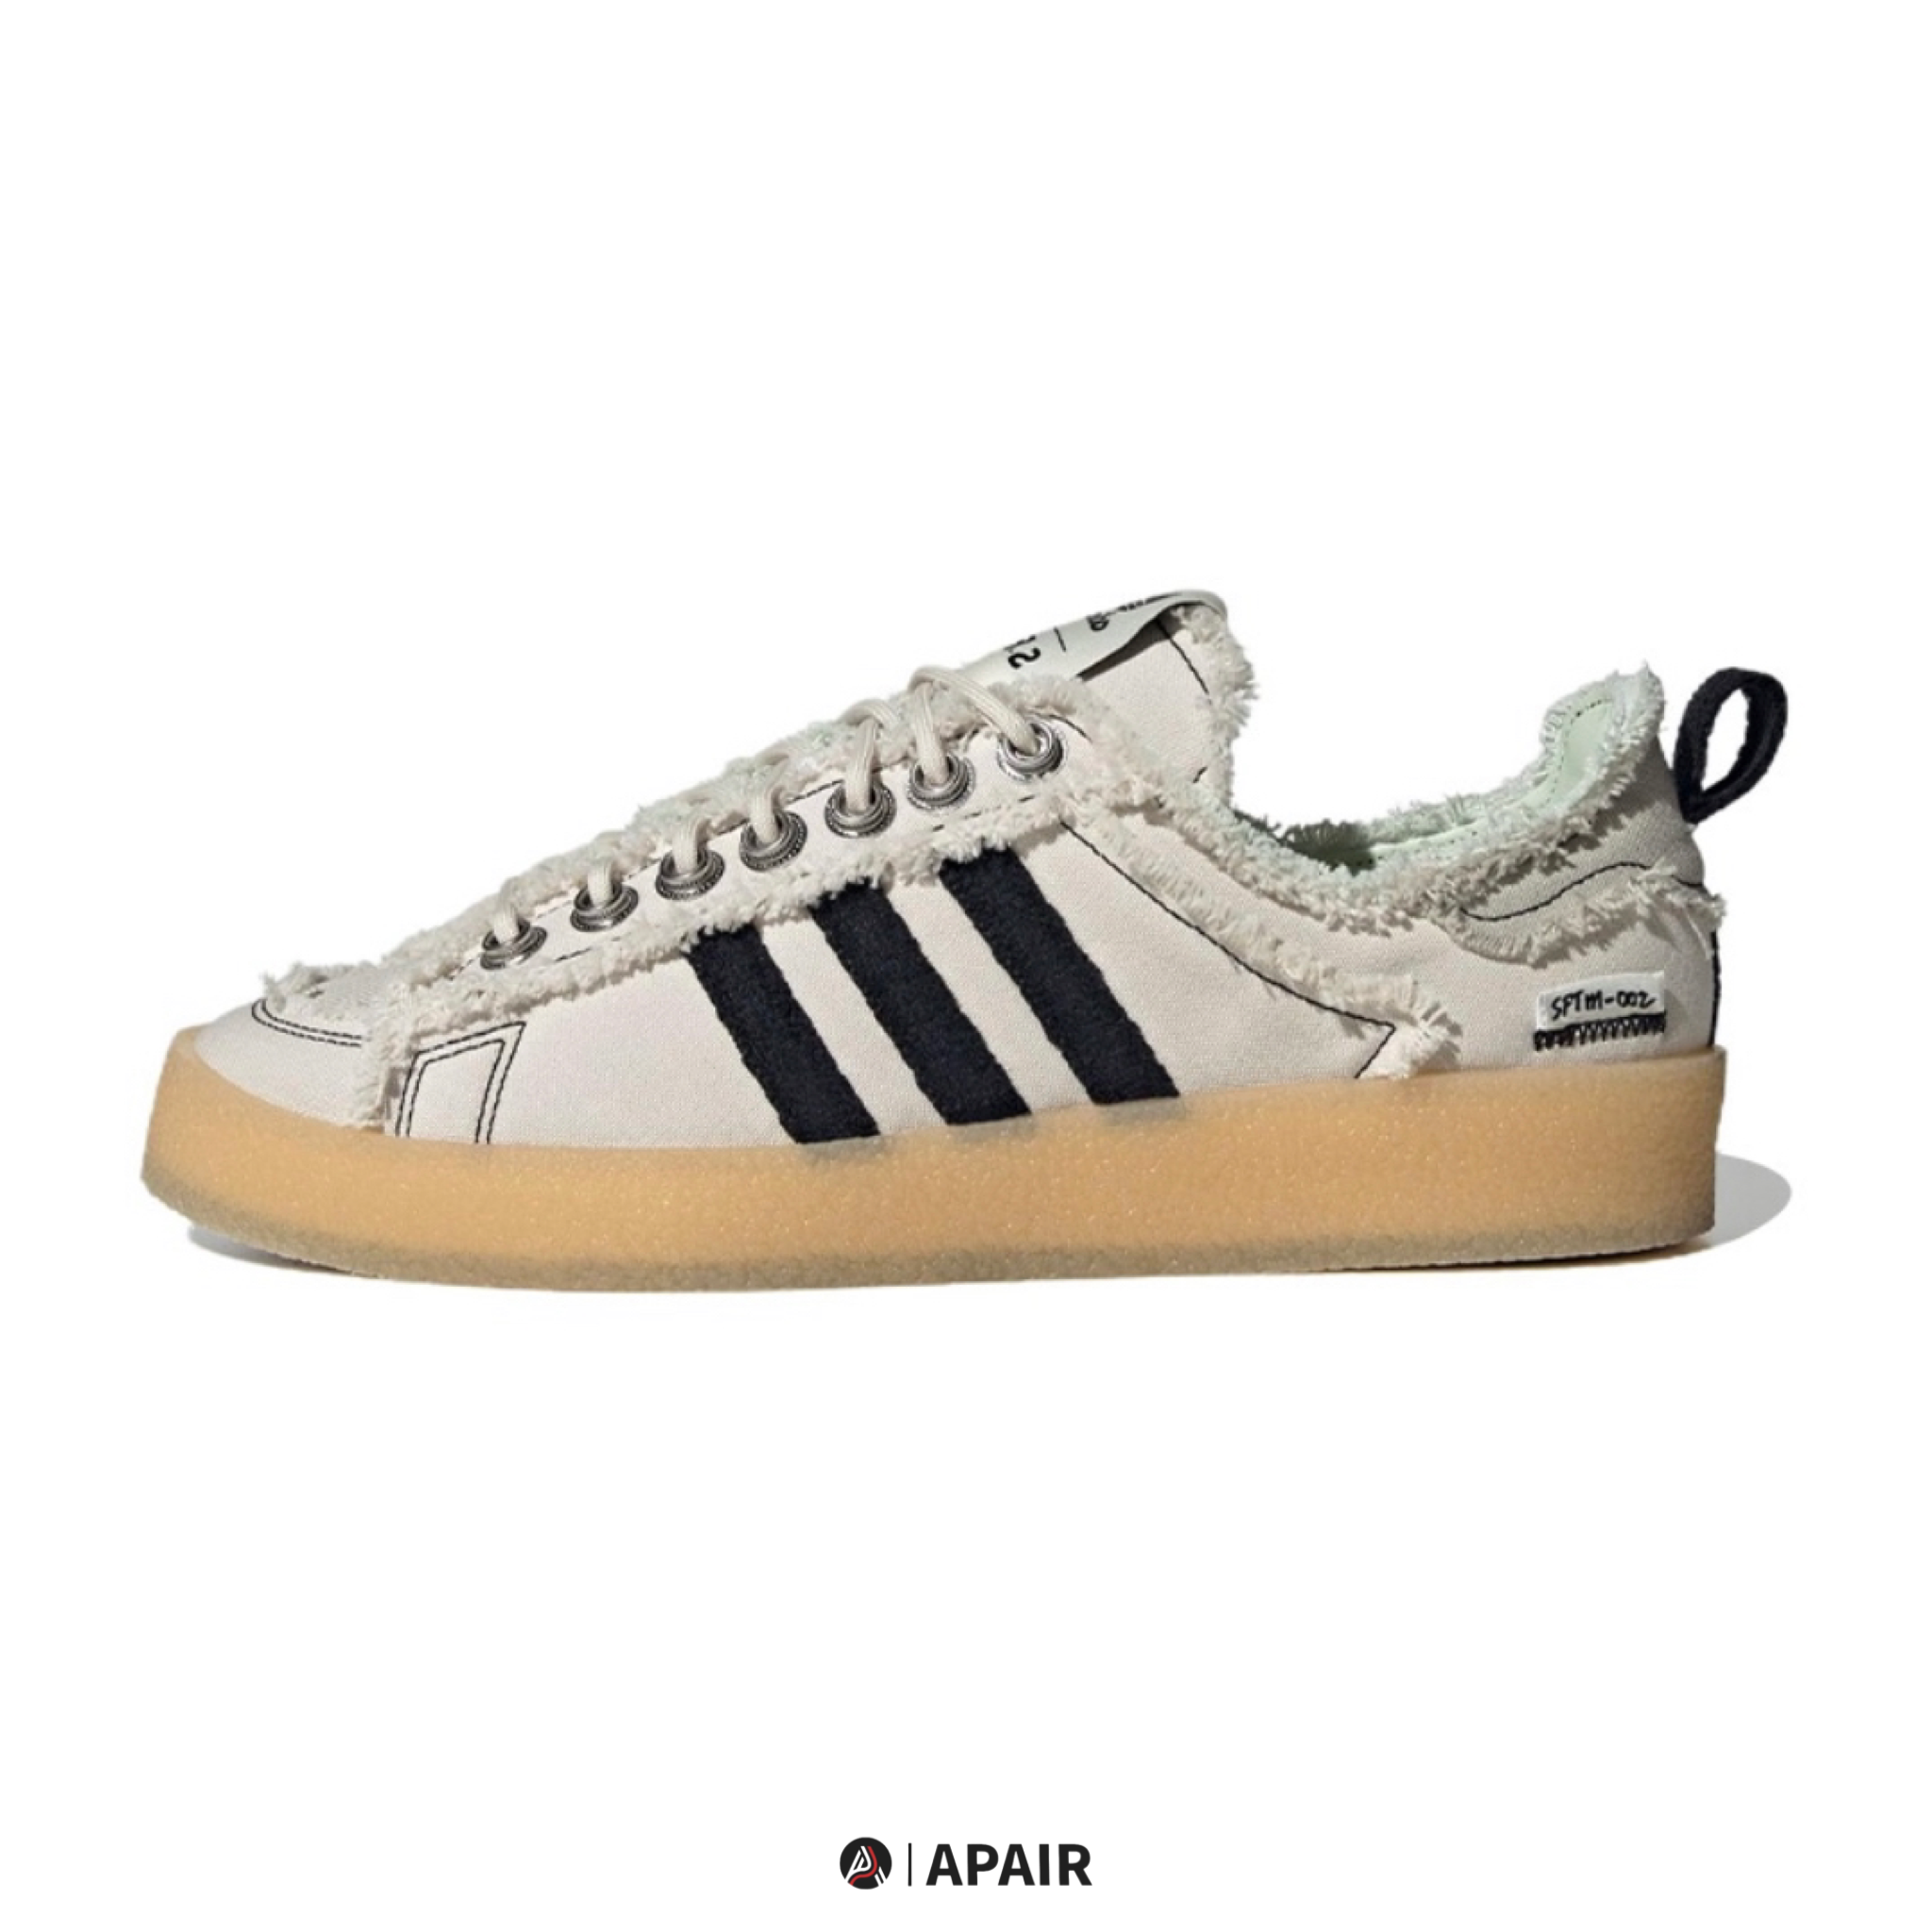 【APAIR】預購Adidas Song for the Mute Bliss x Campus 80s